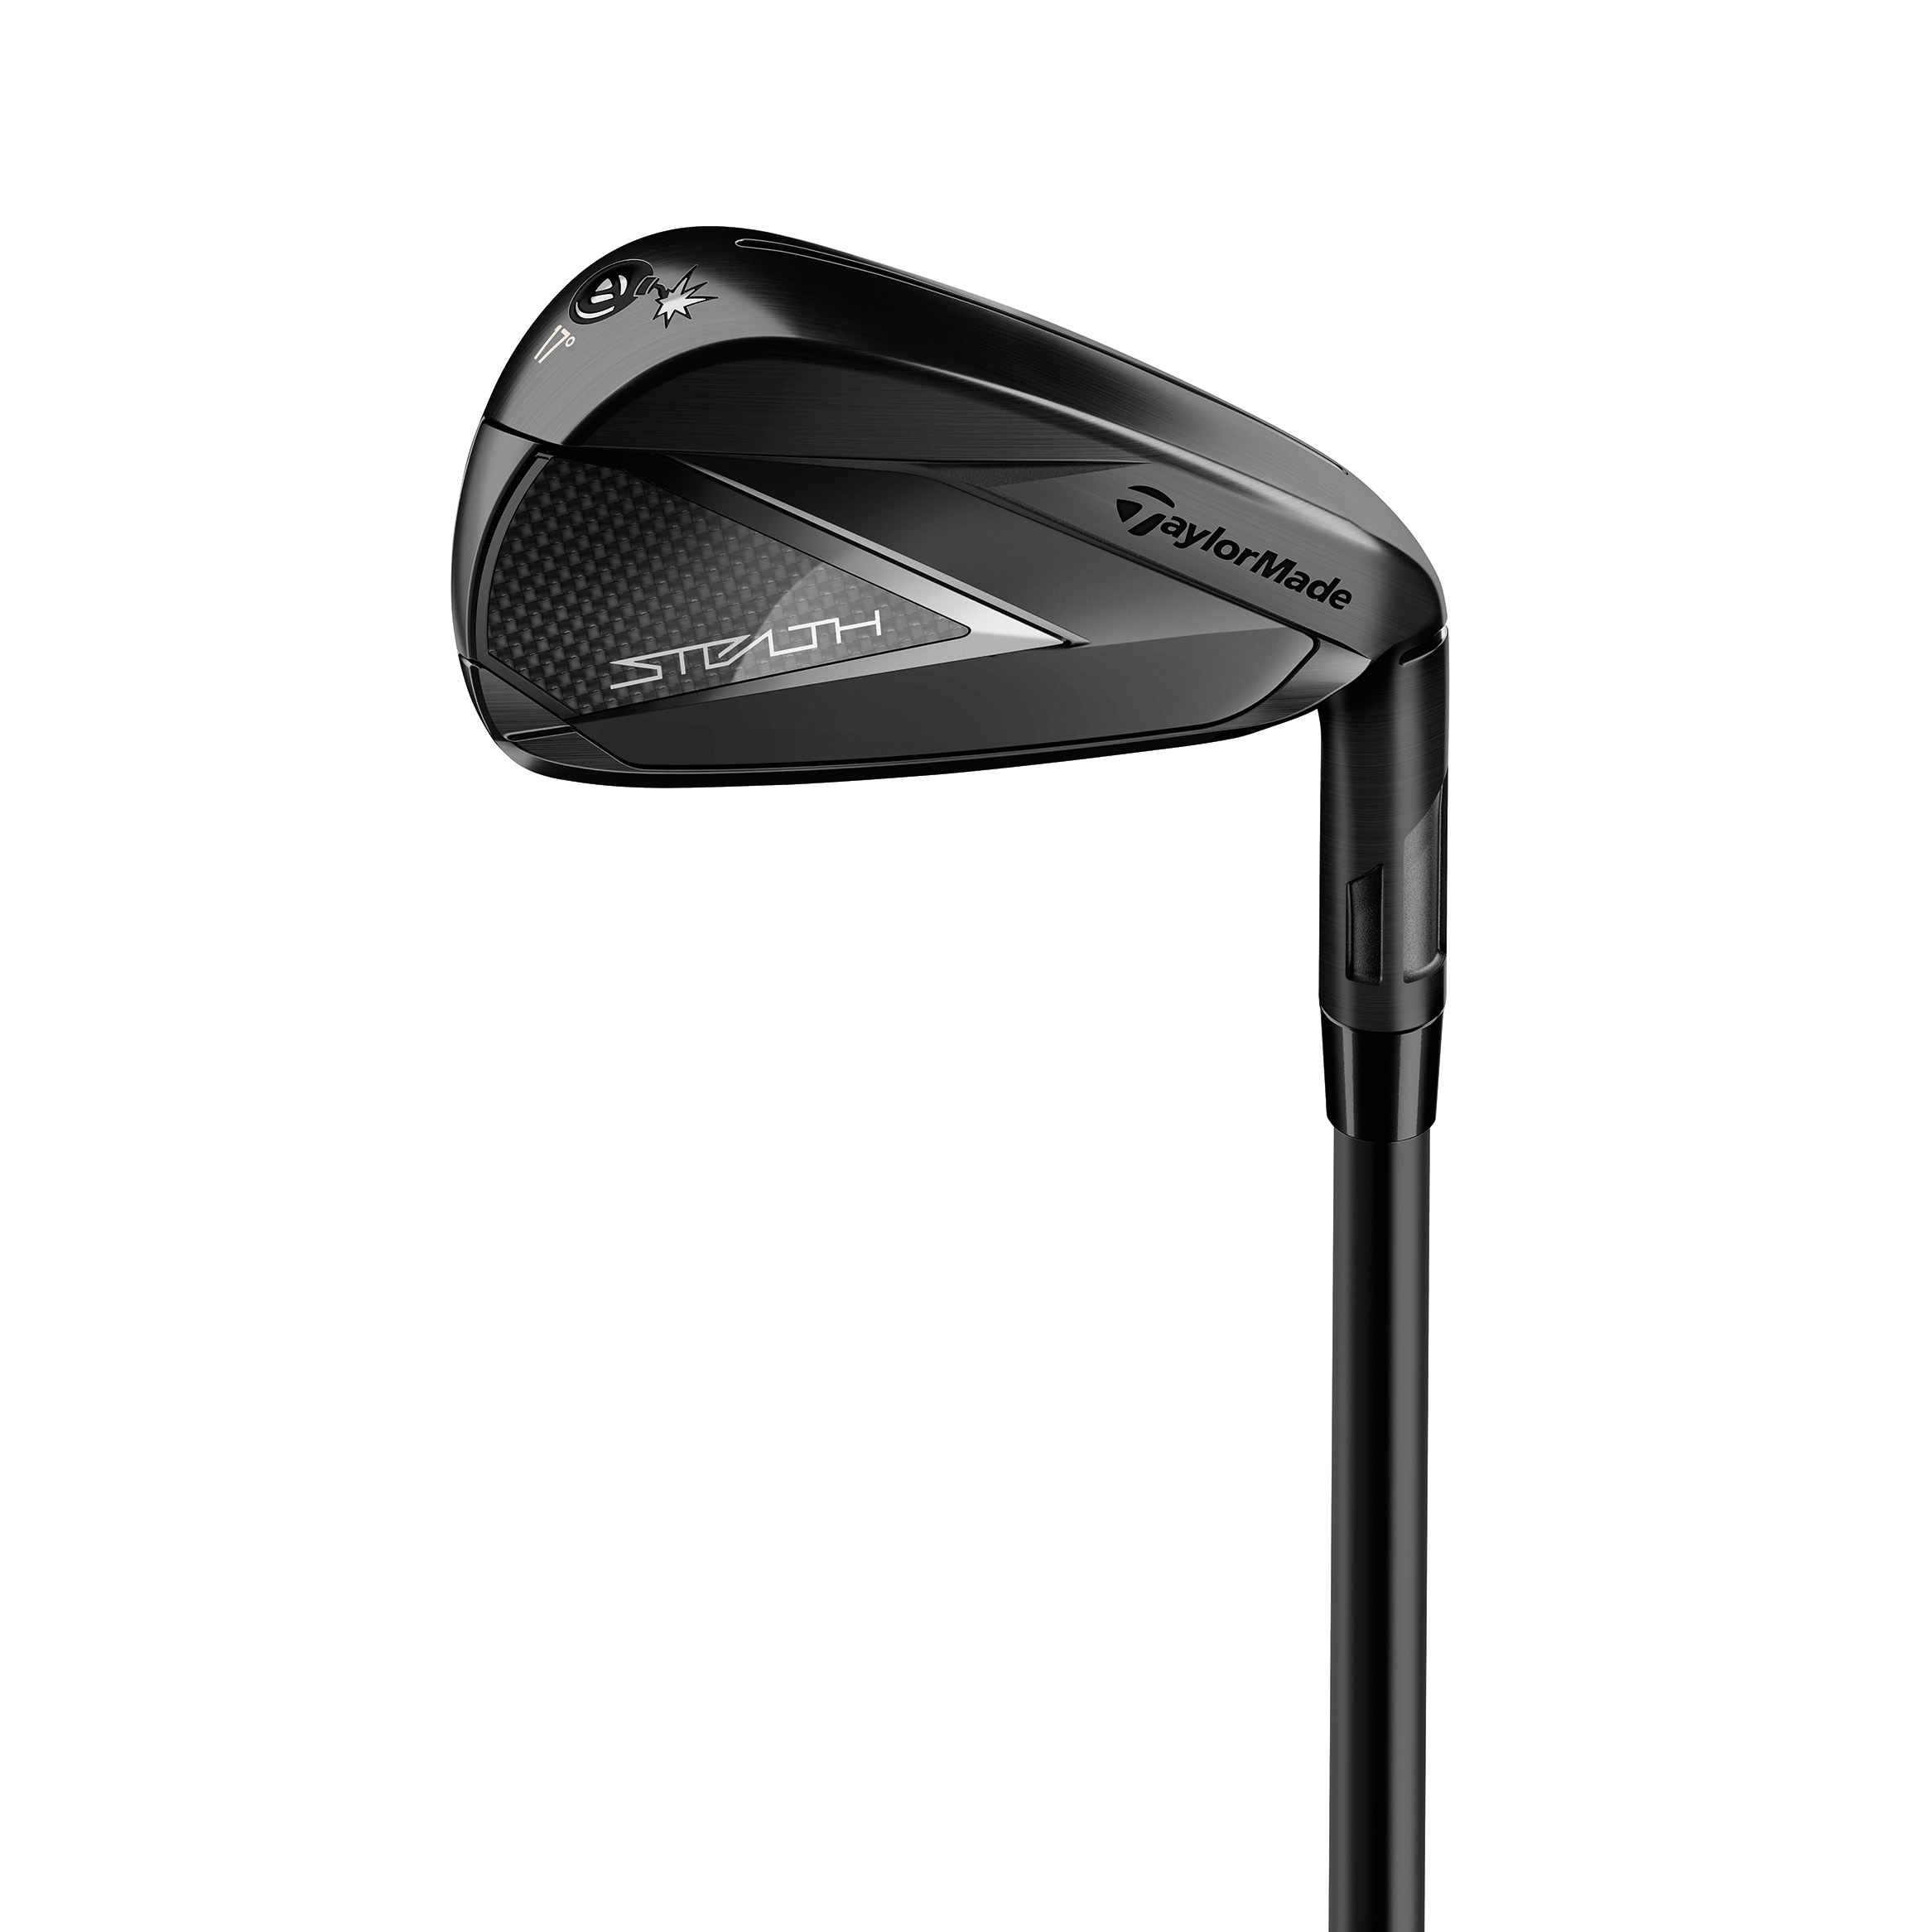 TaylorMade expands Stealth iron line with Stealth Bomber Driving